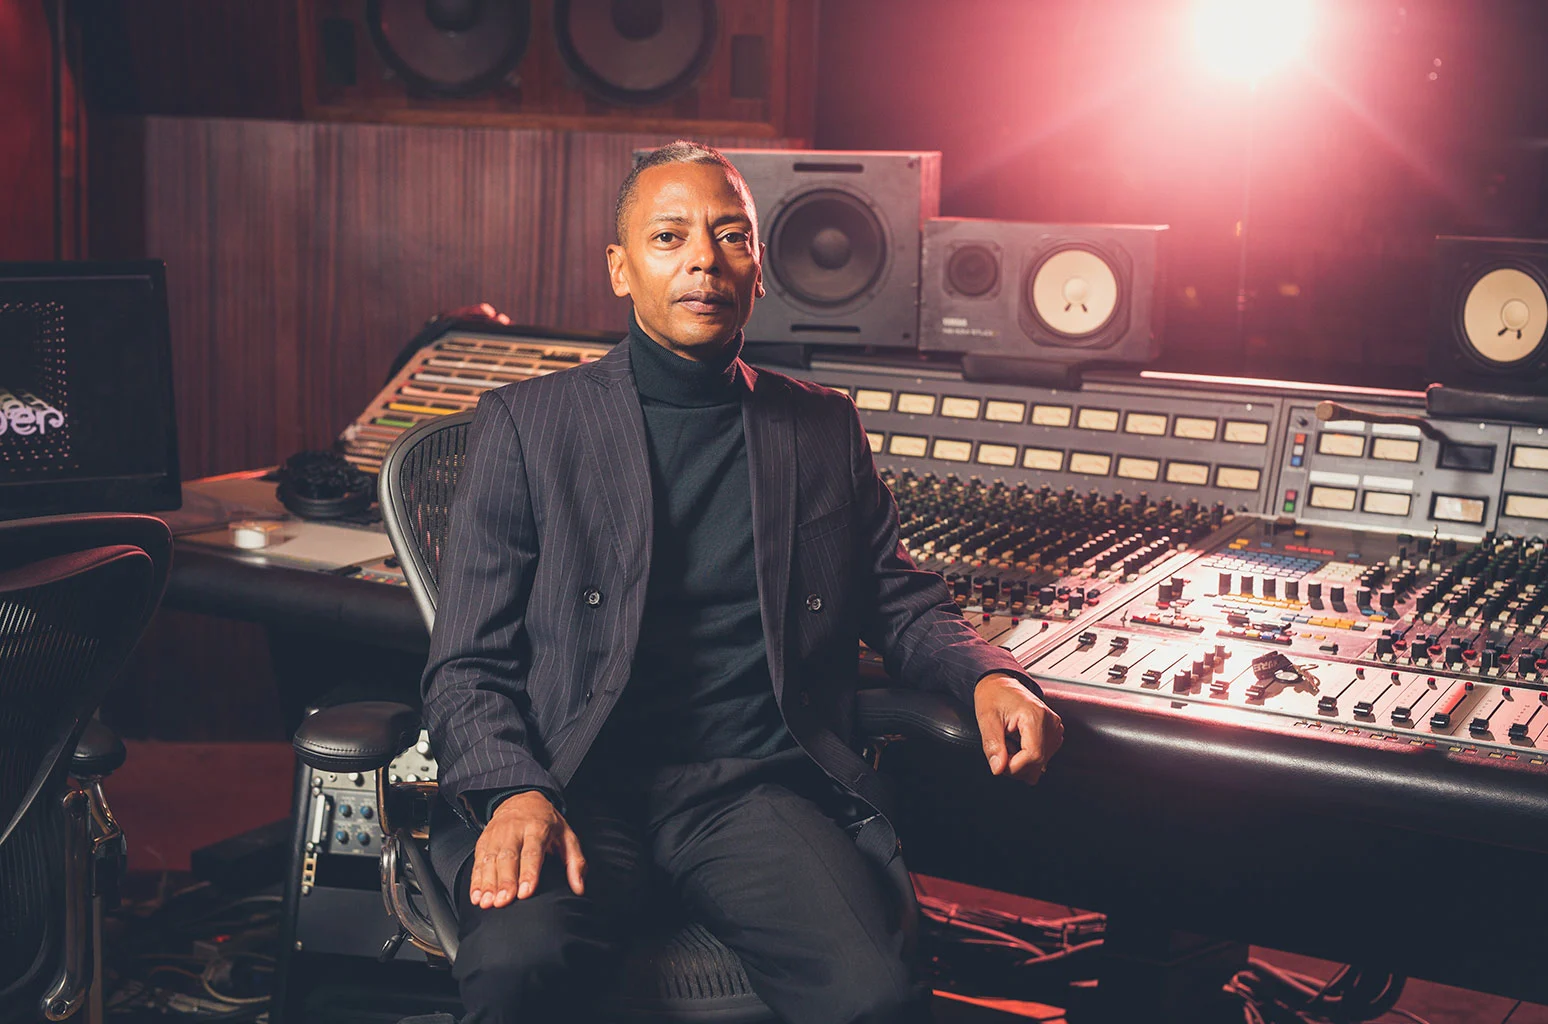 Good Morning Mix: Apple Music introduces new spatial audio DJ mixes with an exclusive set by Jeff Mills Jeff Mills